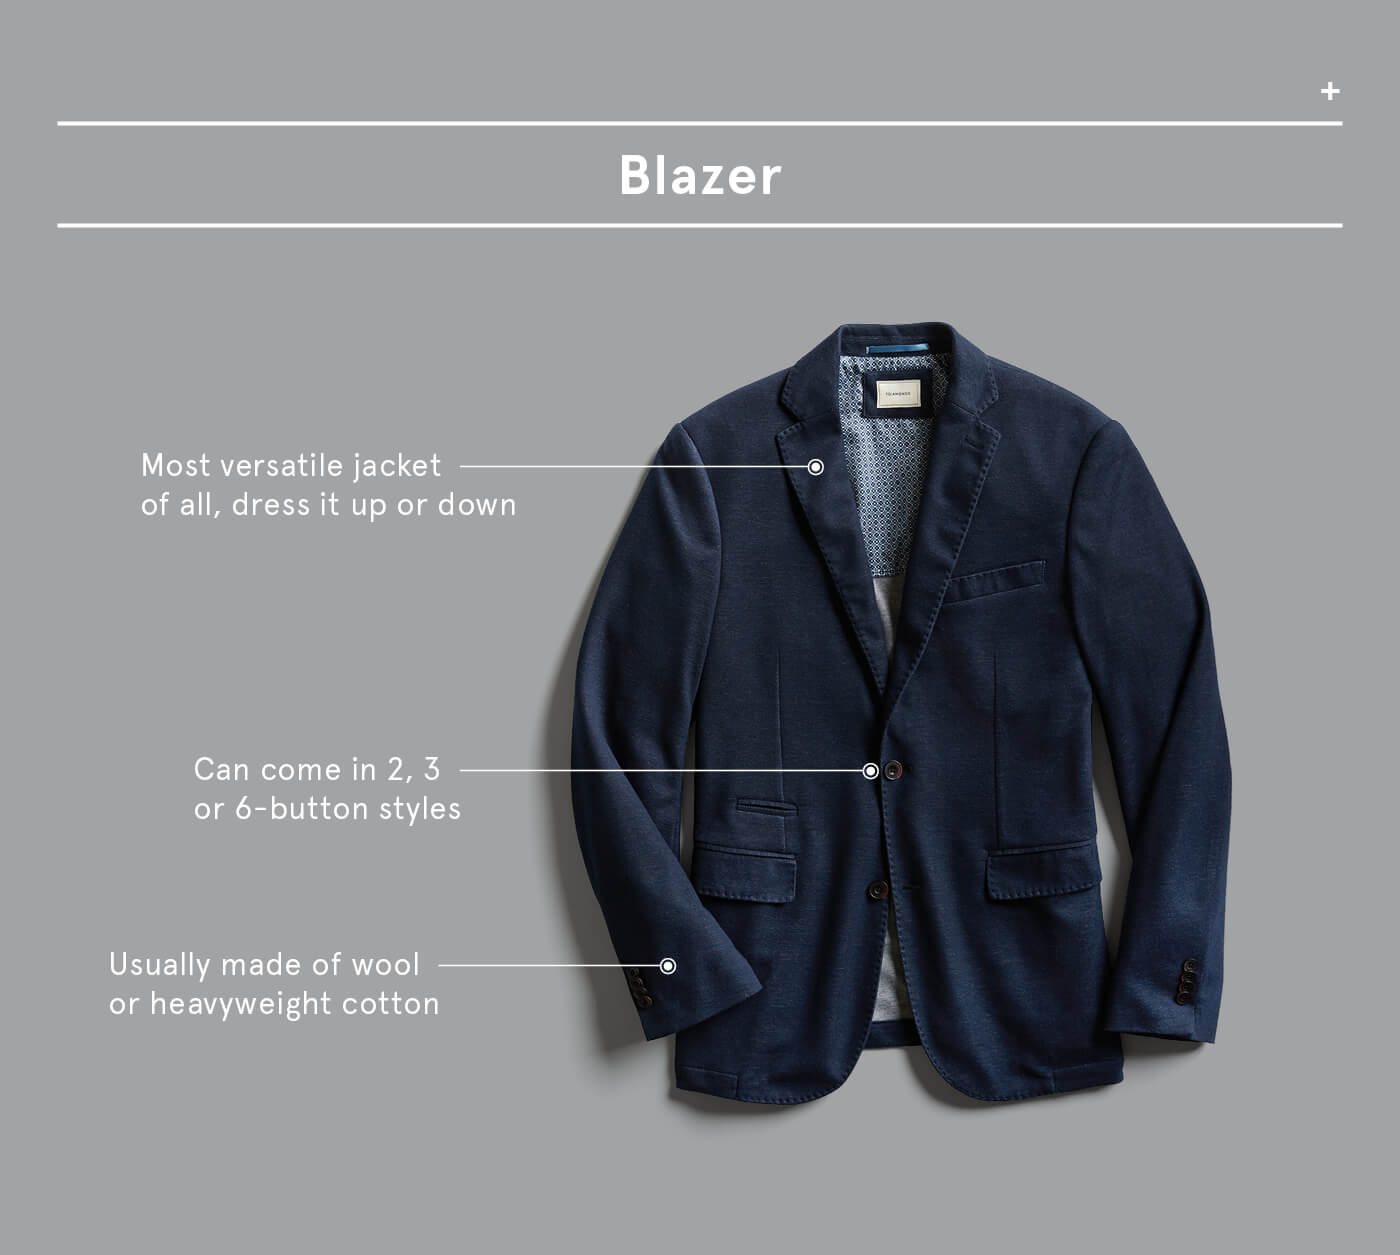 Blazer, sport coat, suit coat—what's the difference